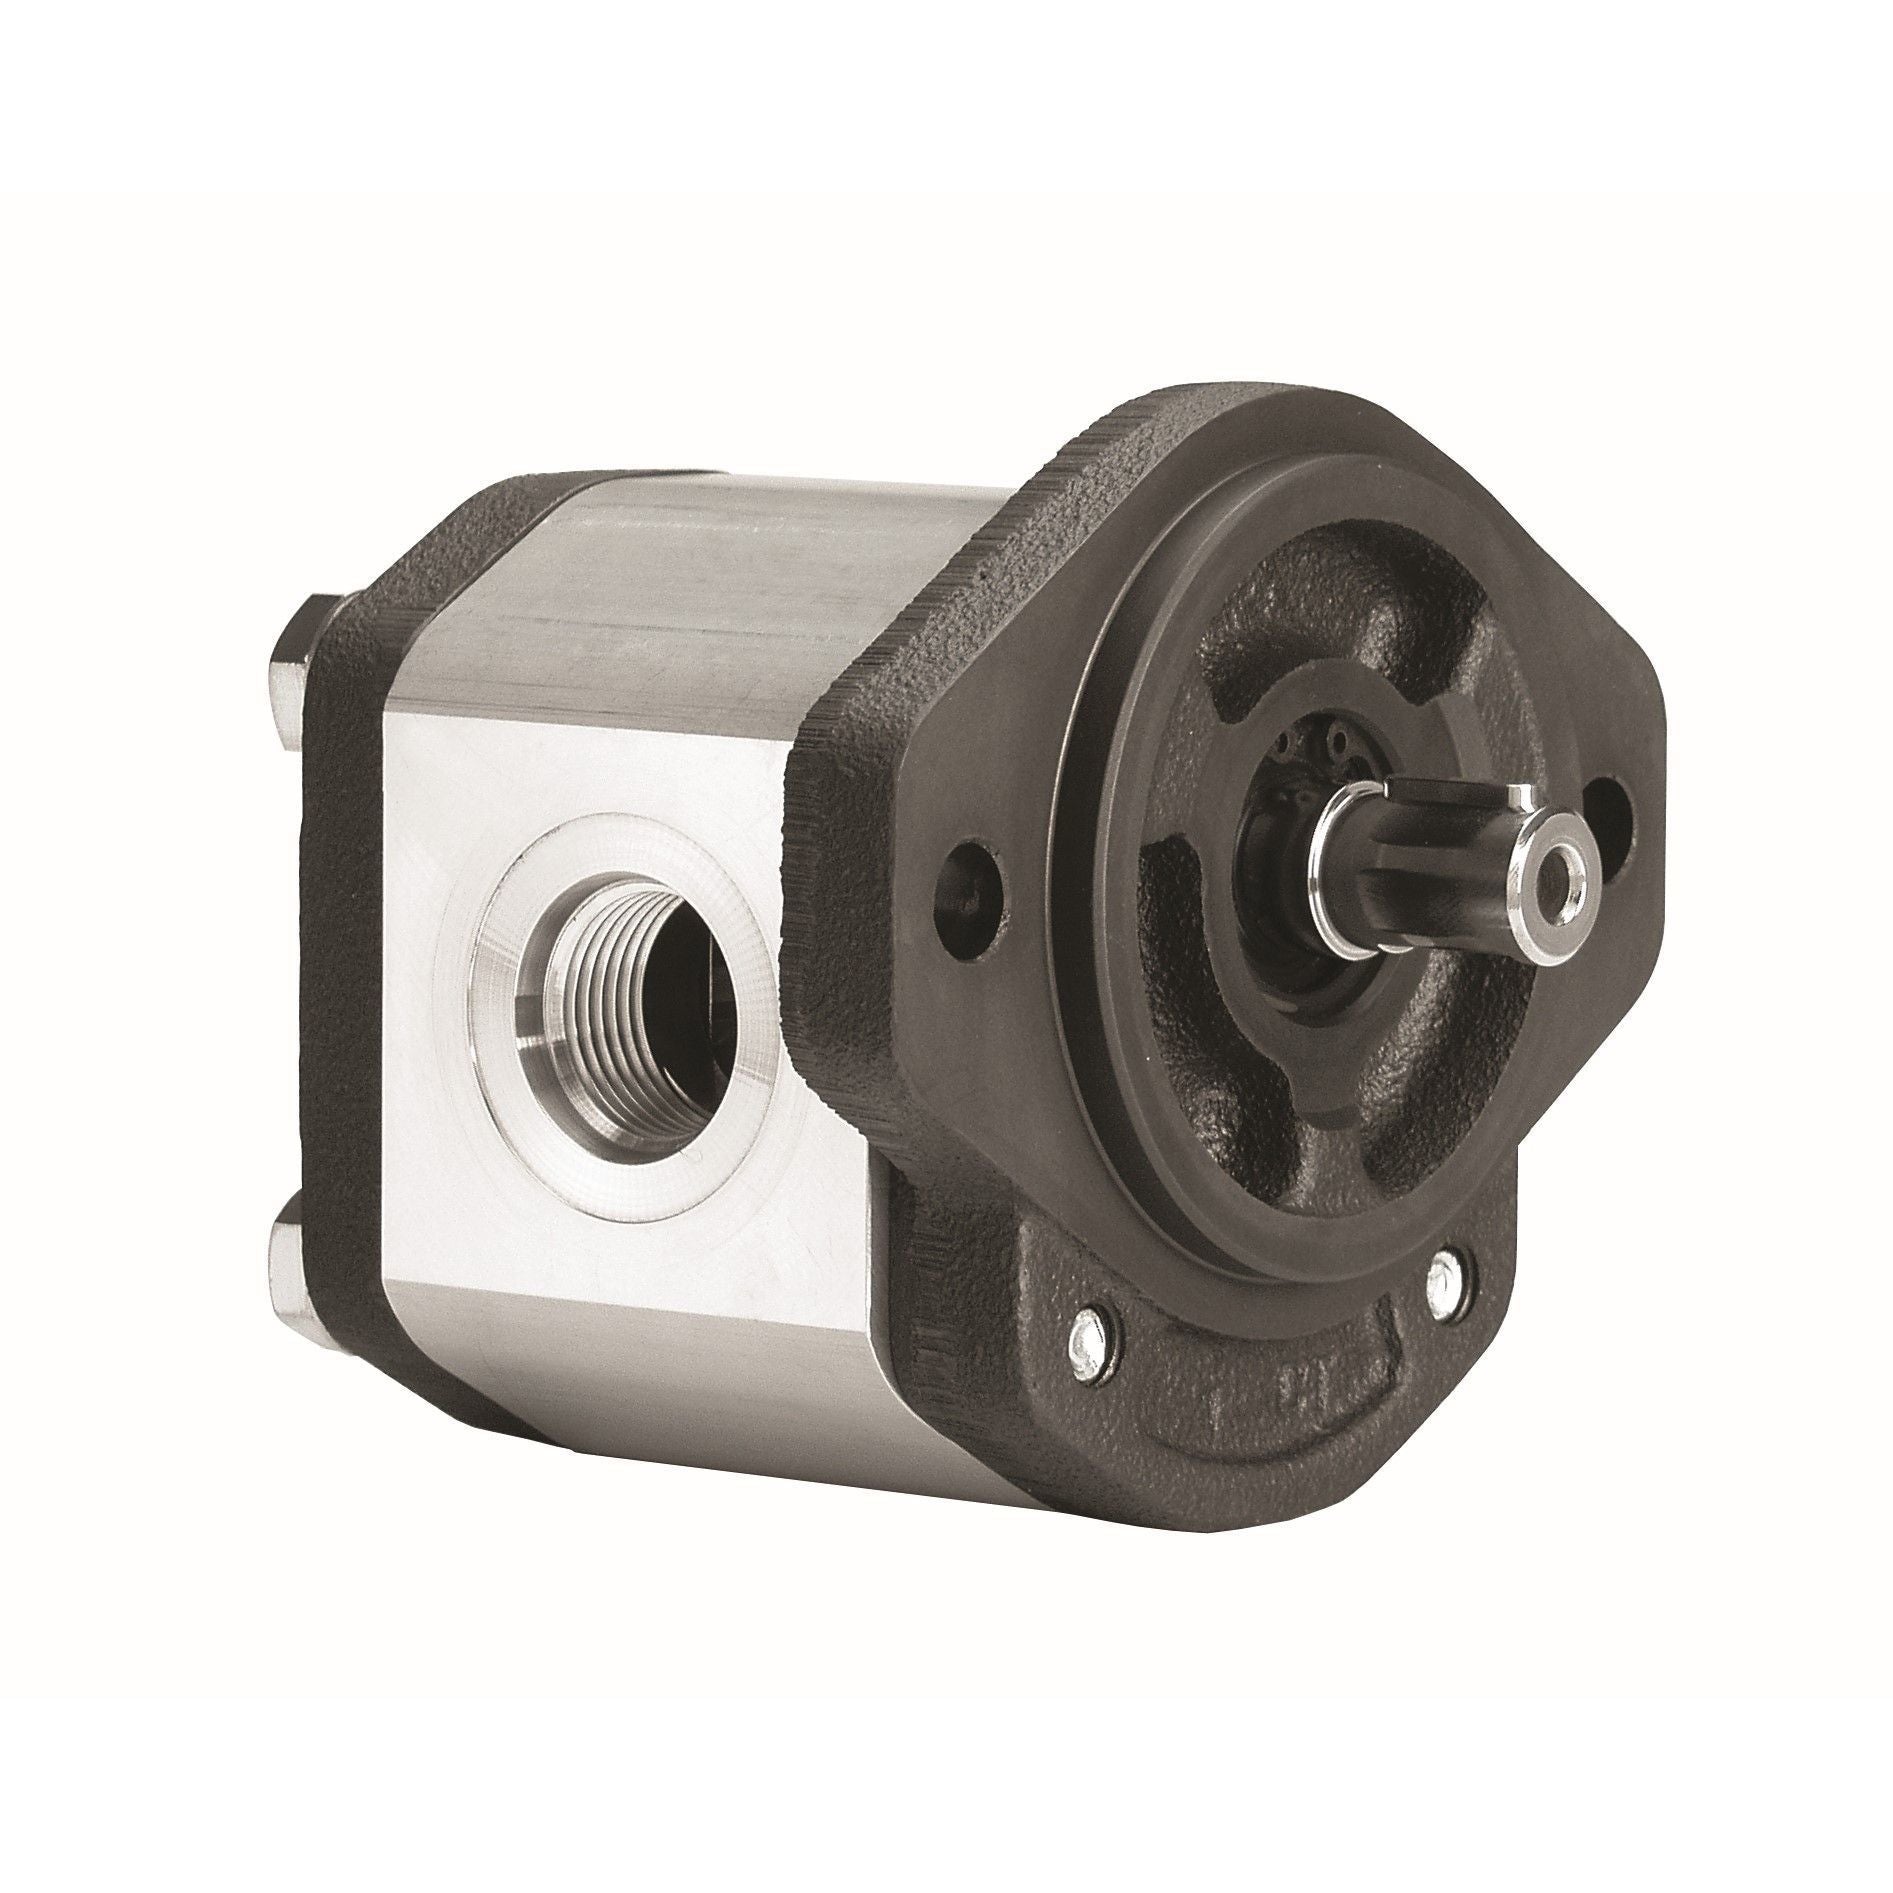 GHP1A-D-9 : Marzocchi Gear Pump, CW, 6.2cc (0.3782in3), 2.95 GPM, 3770psi, 3000 RPM, #8 SAE (1/2") In, #6 SAE (3/8") Out, Keyed Shaft 1/2" Bore x 1/8" Key, SAE AA 2-Bolt Mount